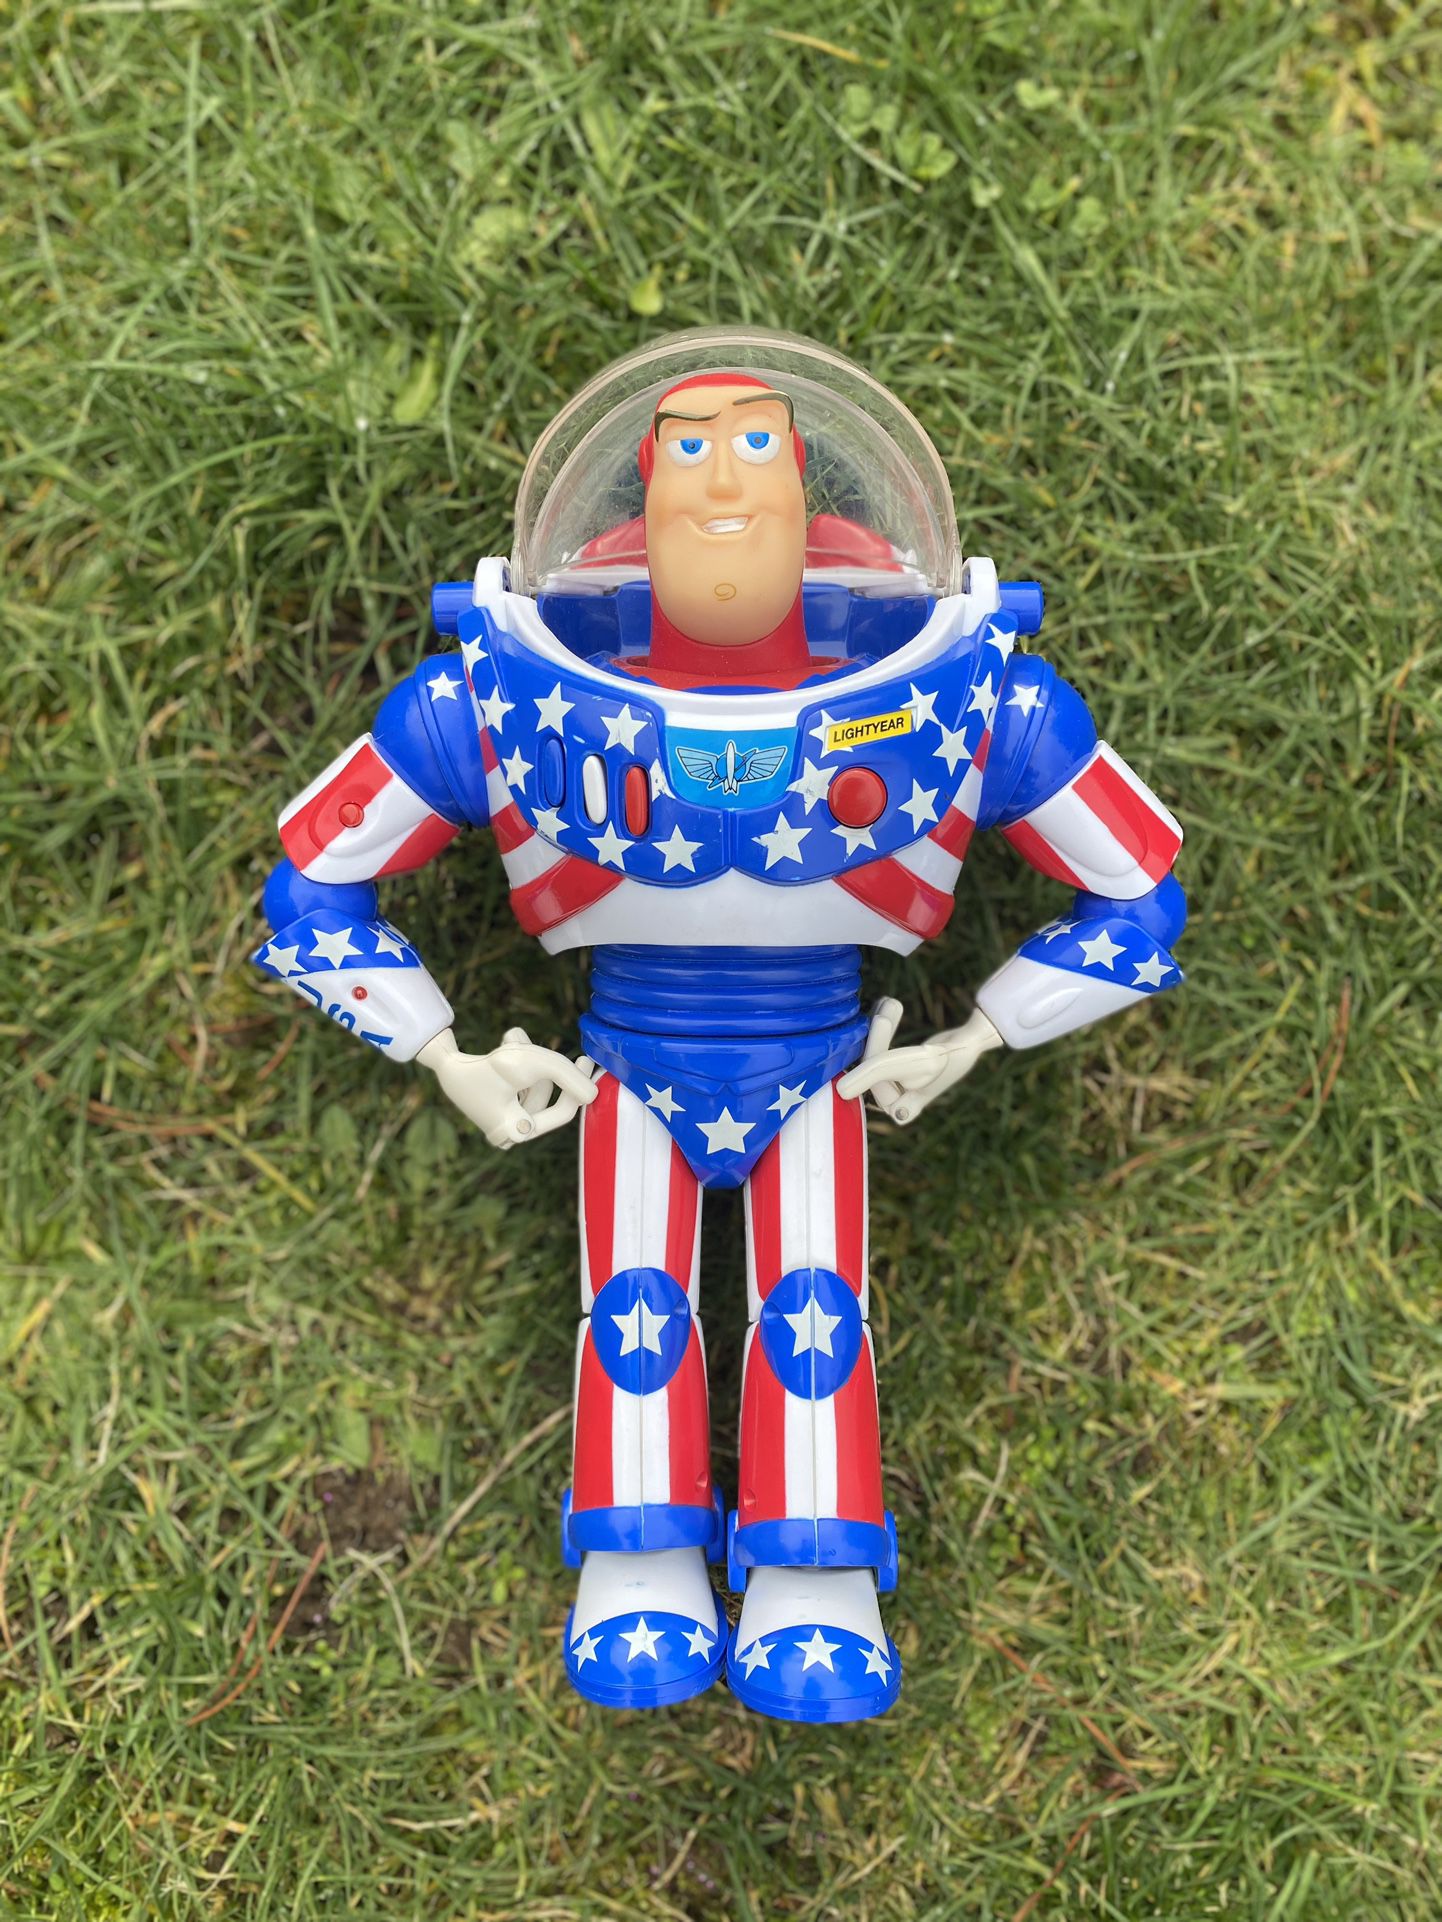 🚨pending 🚨 1995 Limited Edition Stars and Stripes Buzz Lightyear 